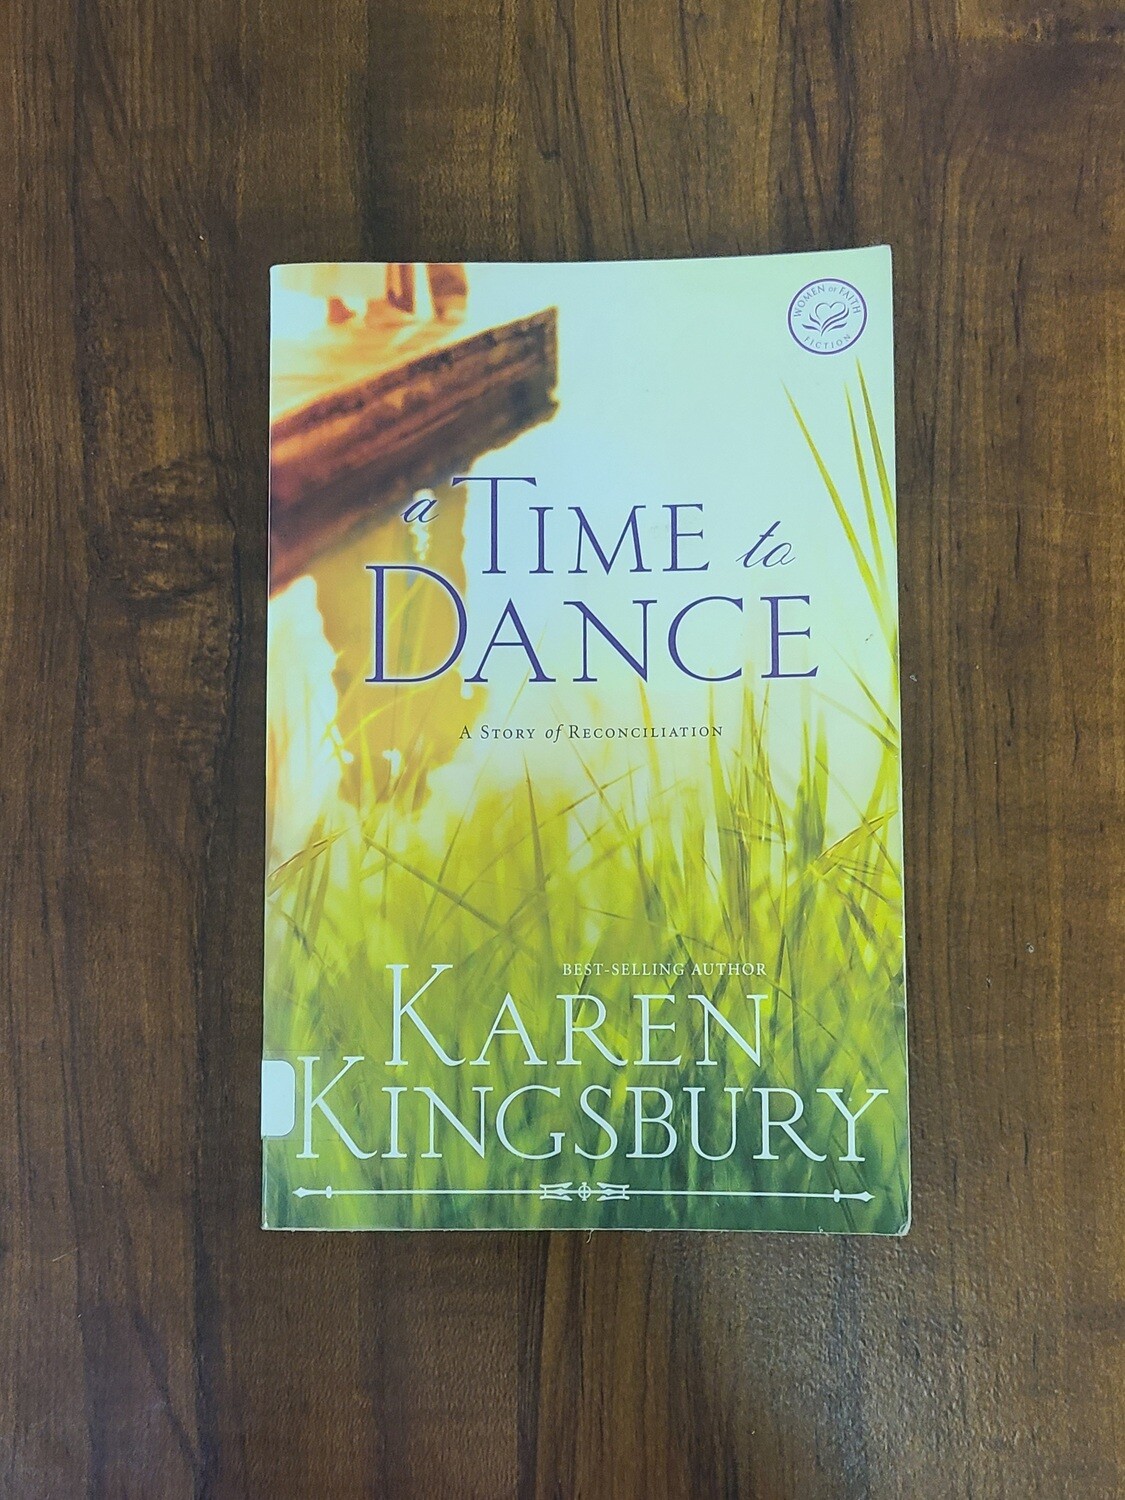 A Time to Dance by Karen Kingsbury